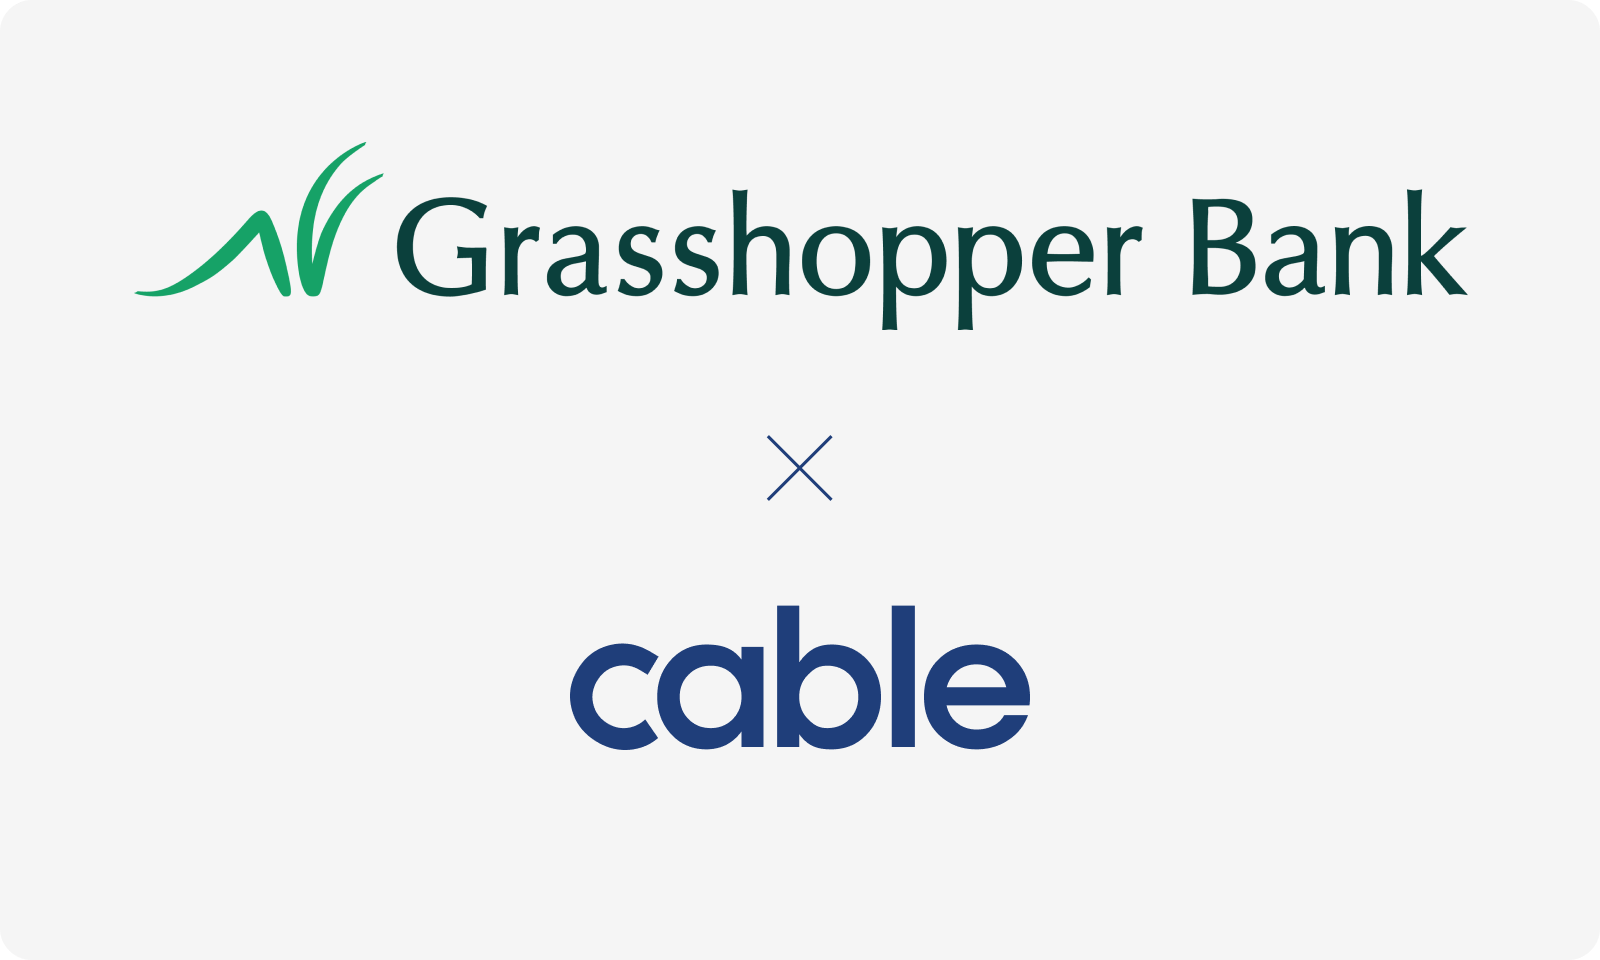 Grasshopper Bank partners with Cable for cutting-edge automated financial crime effectiveness testing